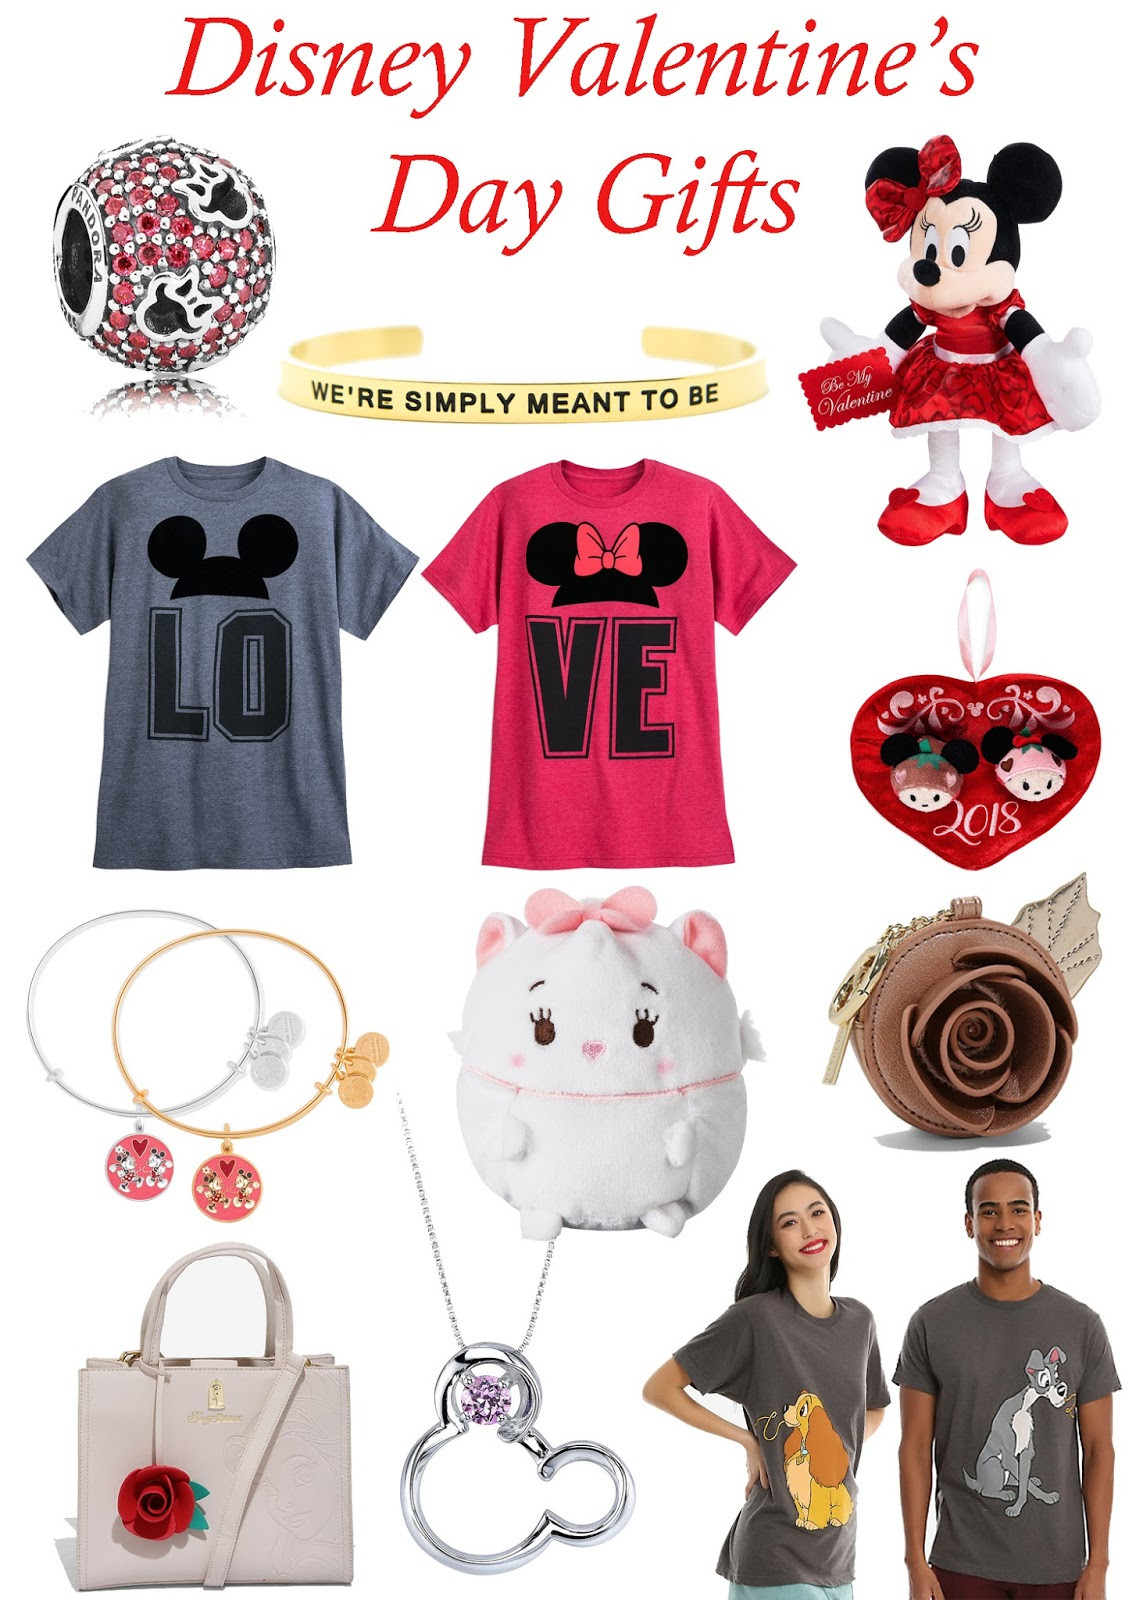 Disney Valentines Day Gifts
 Sew Cute Dose of Disney Disney Valentine s Day Gift Ideas